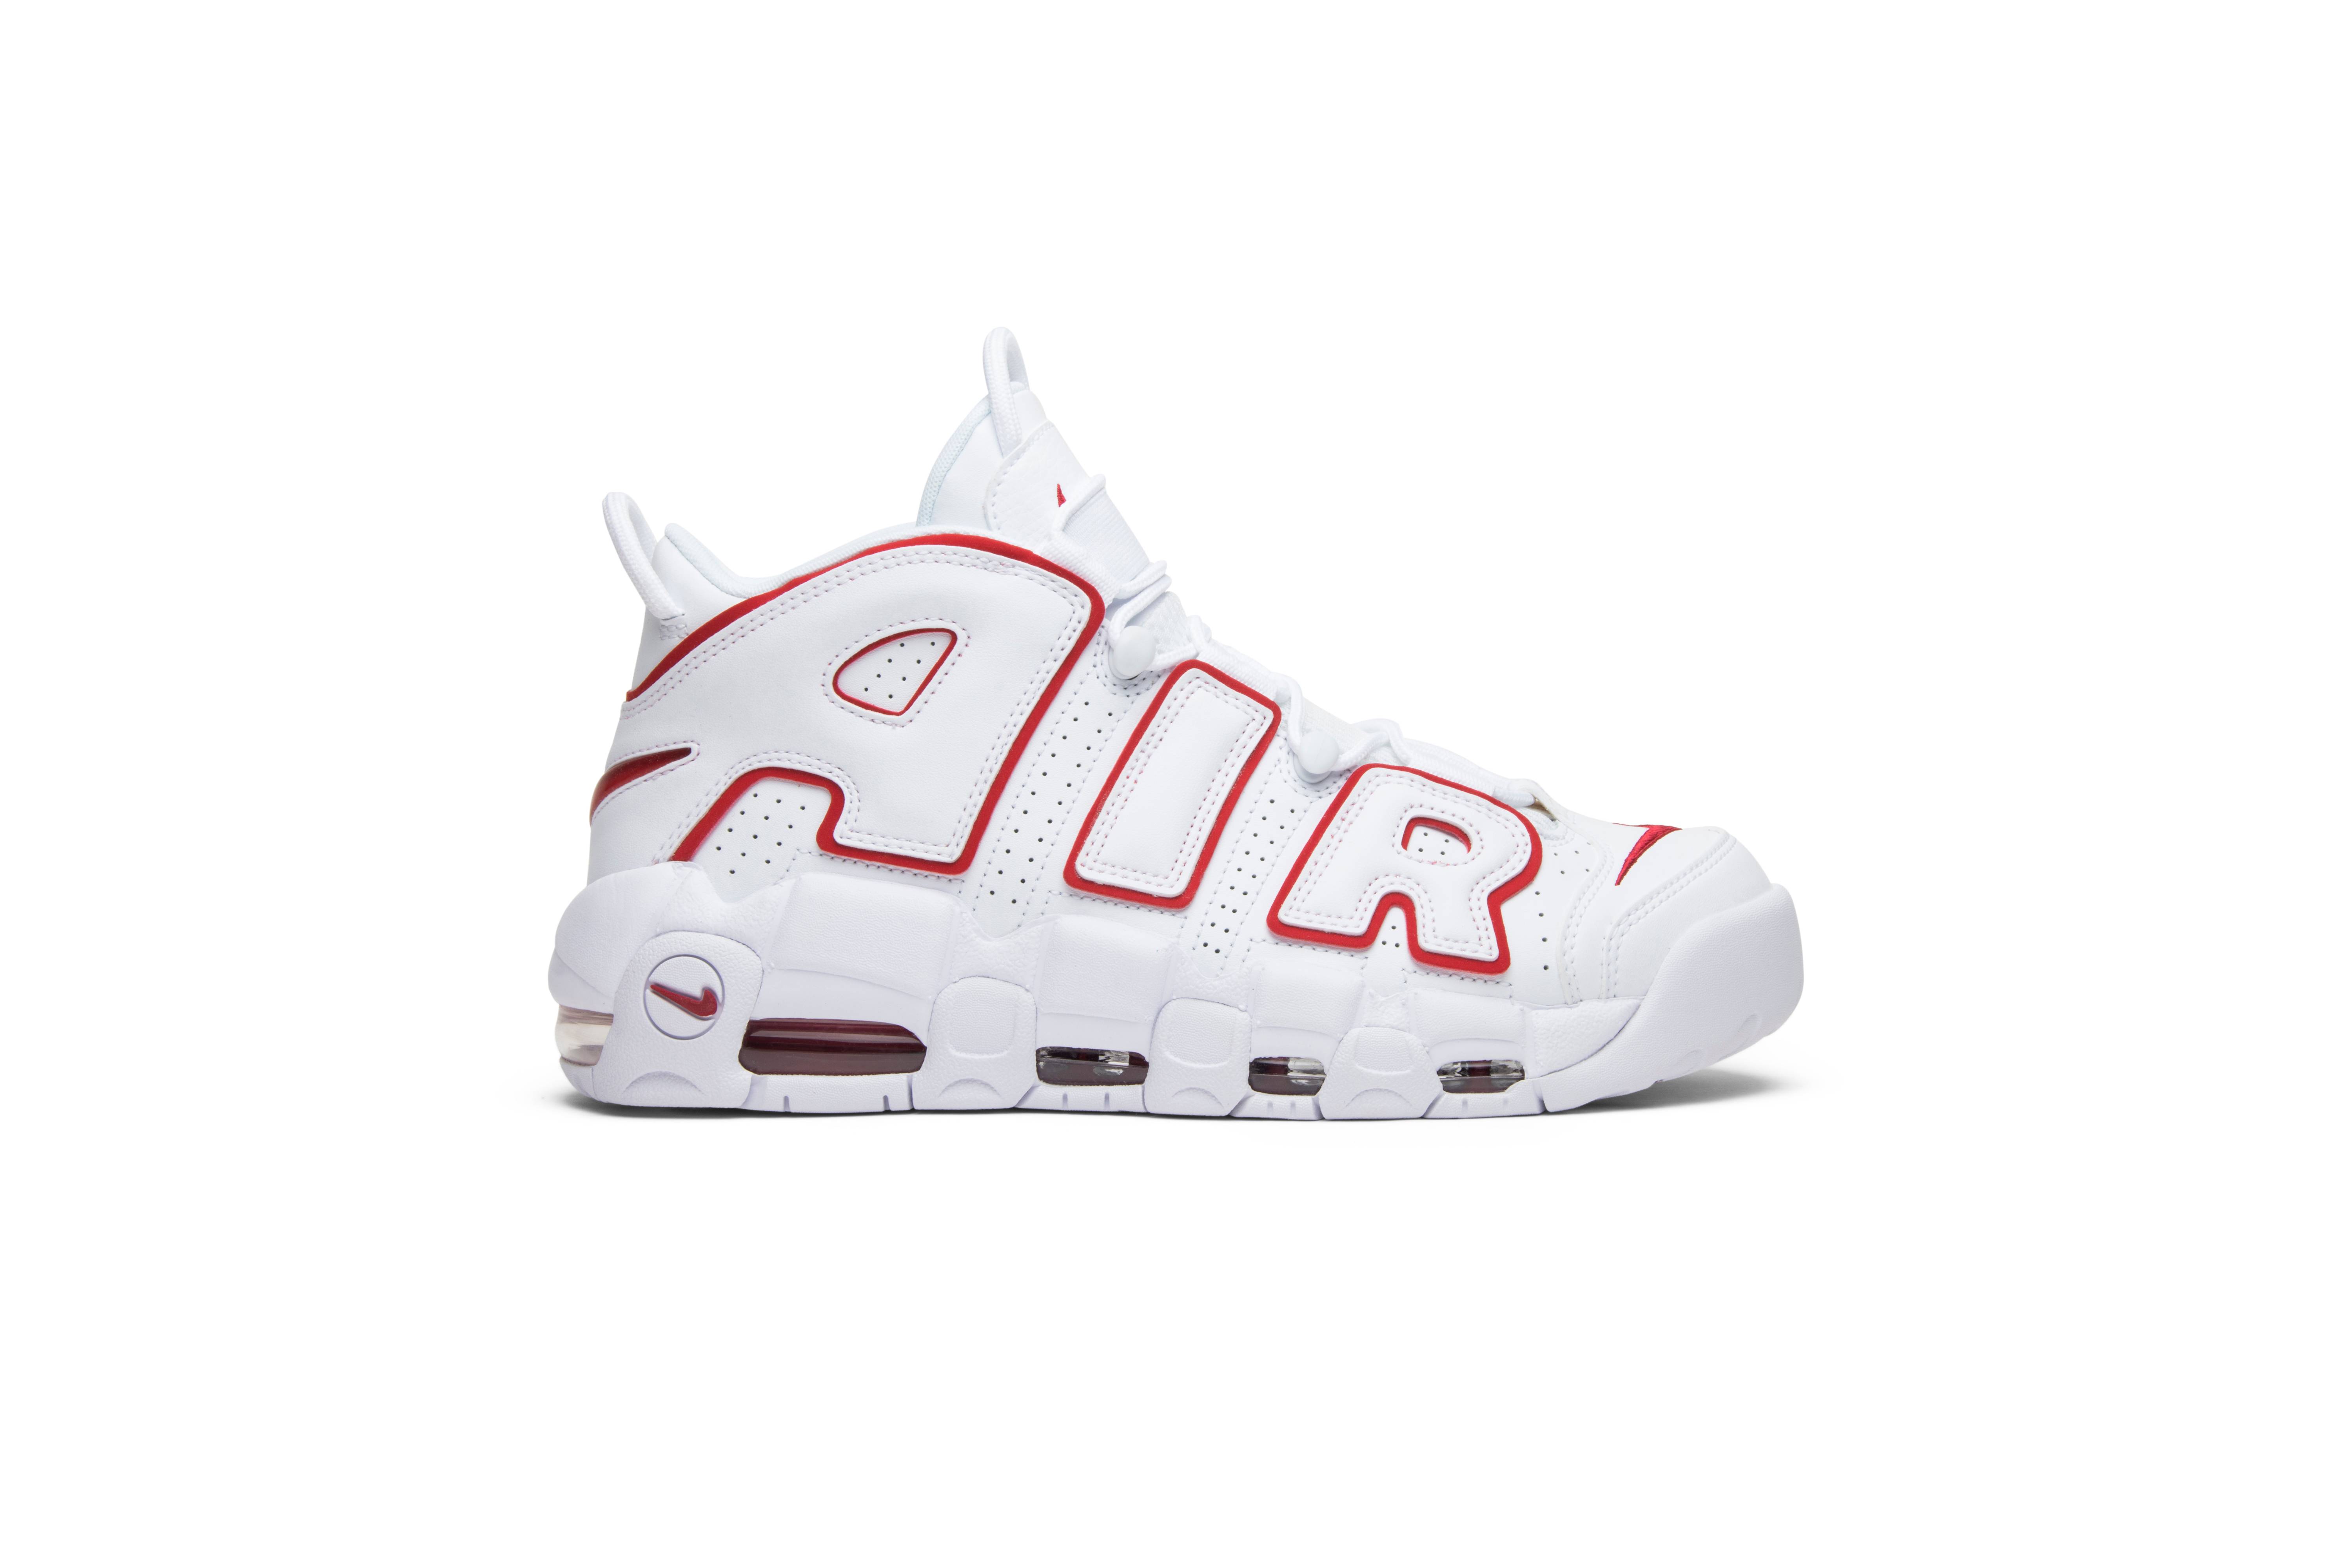 red air max uptempo